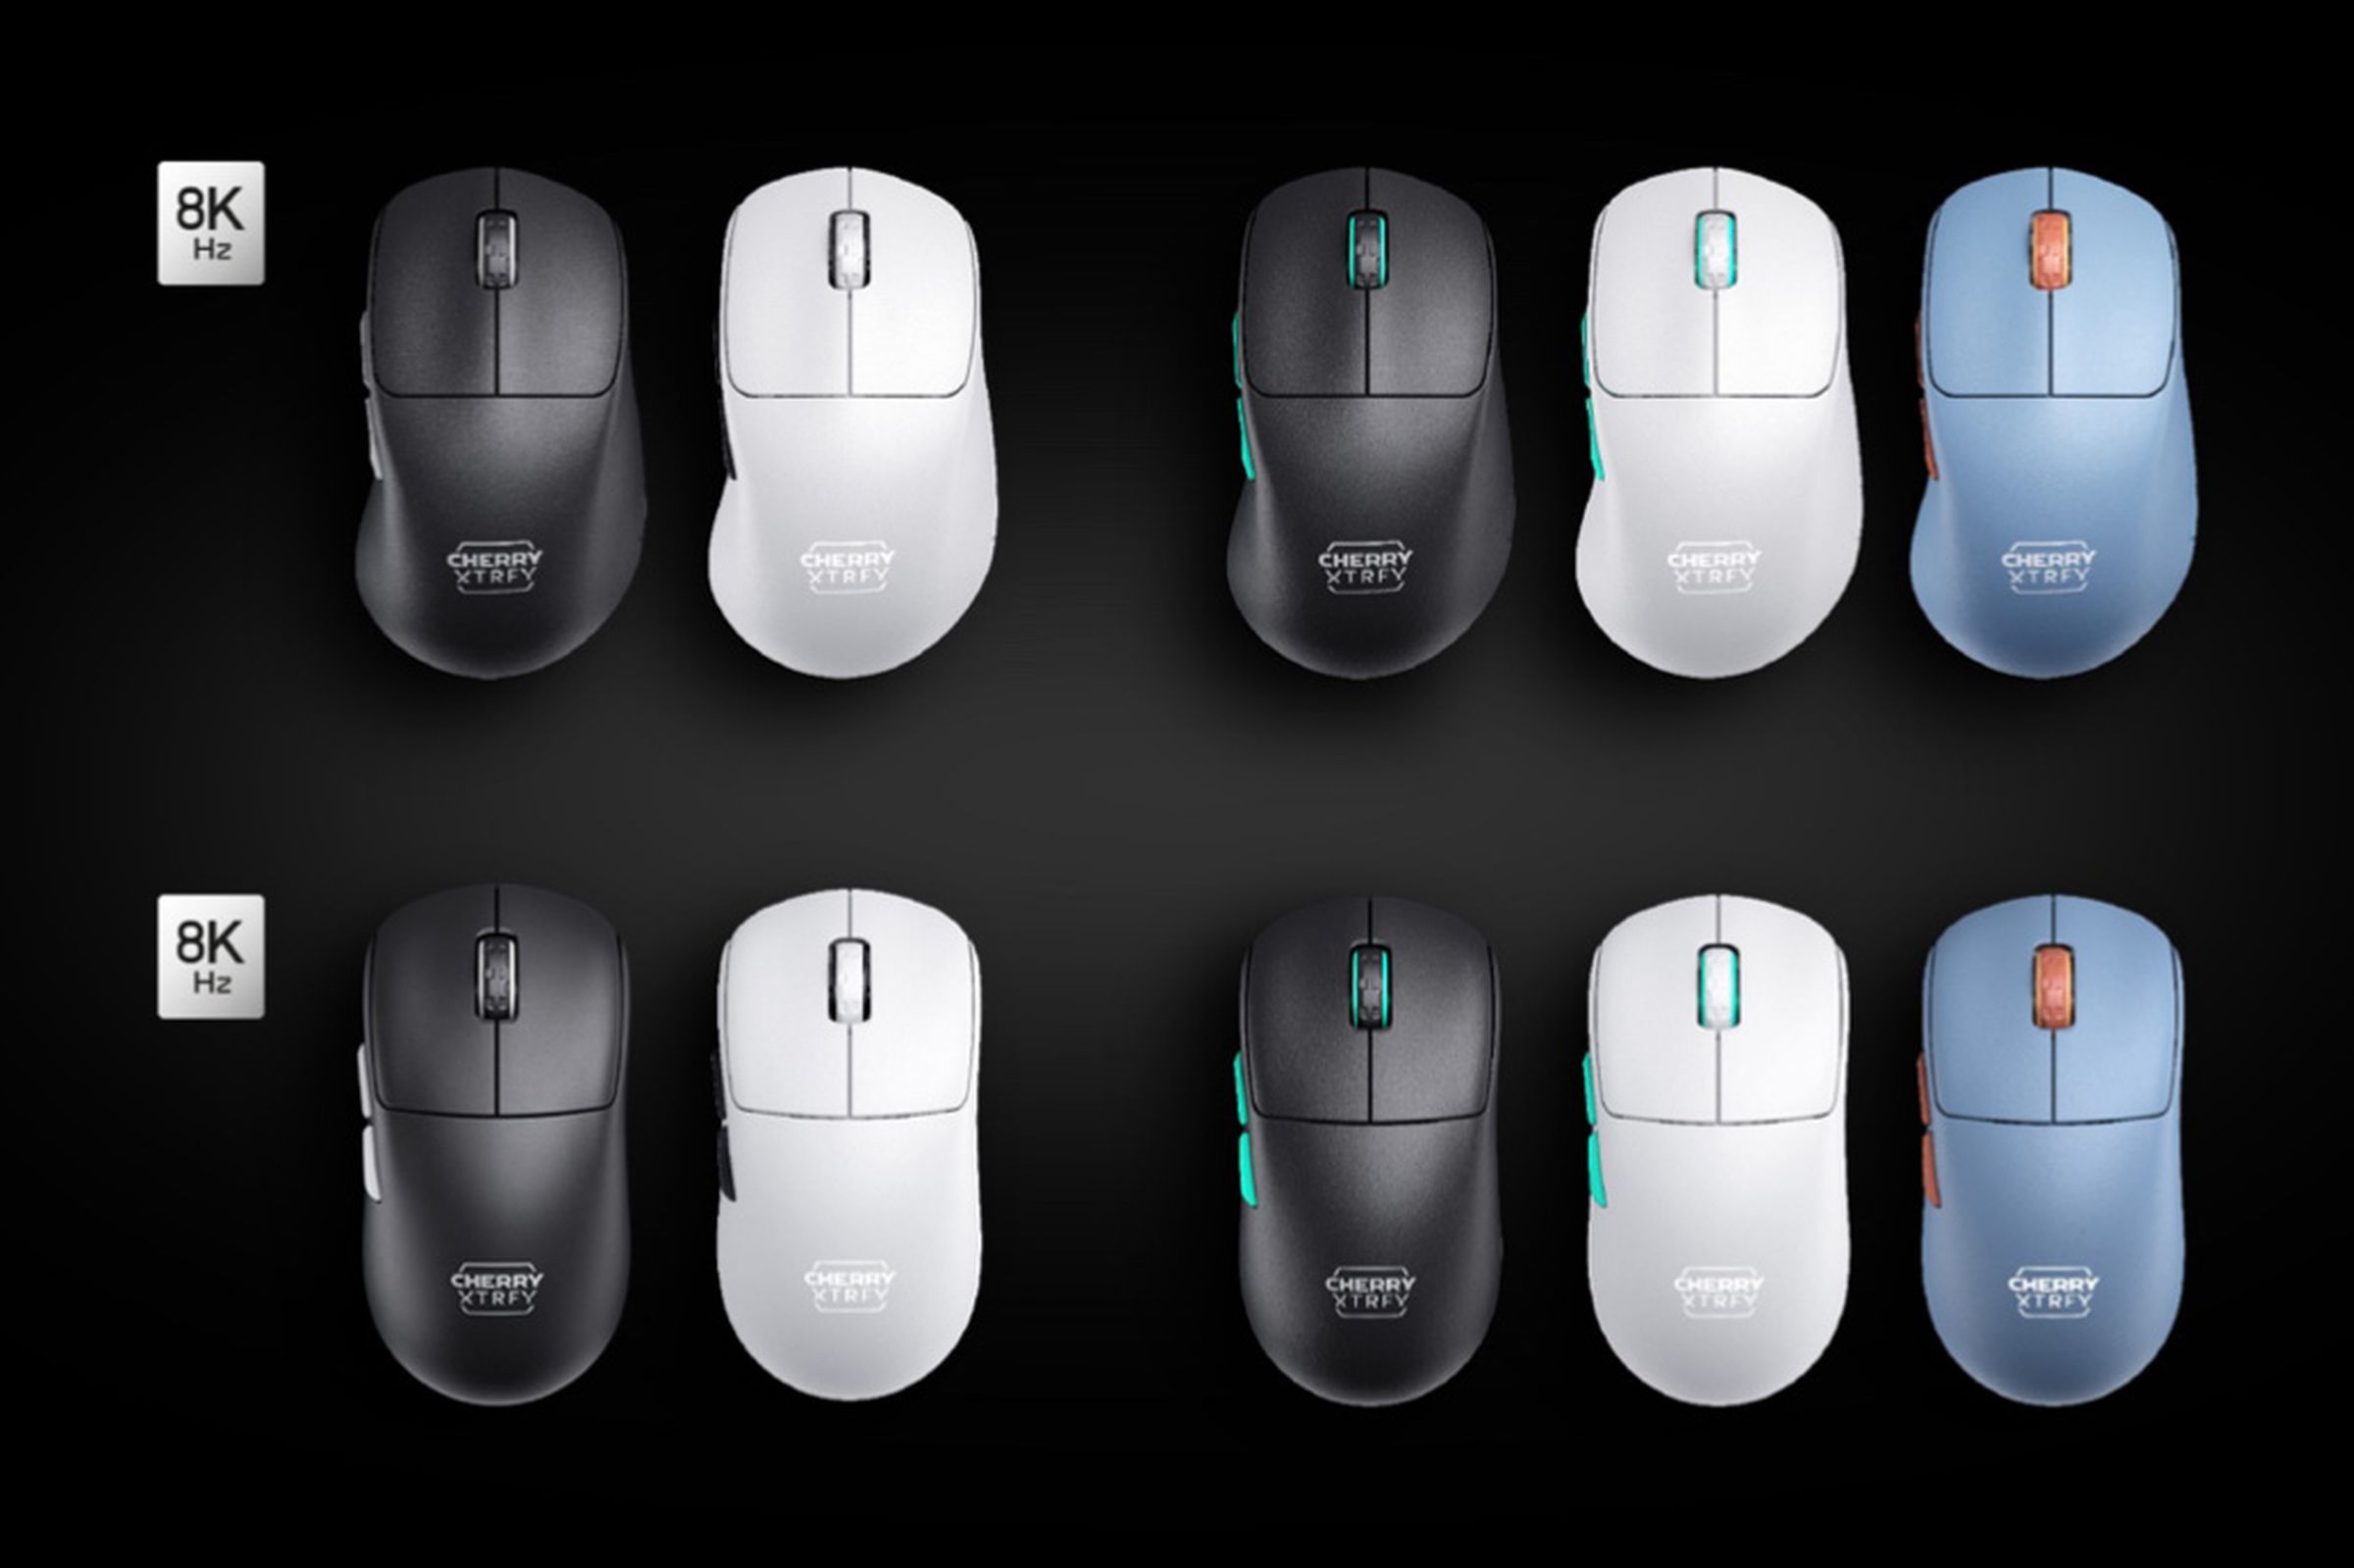 New Cherry mice in black, white, and blue.